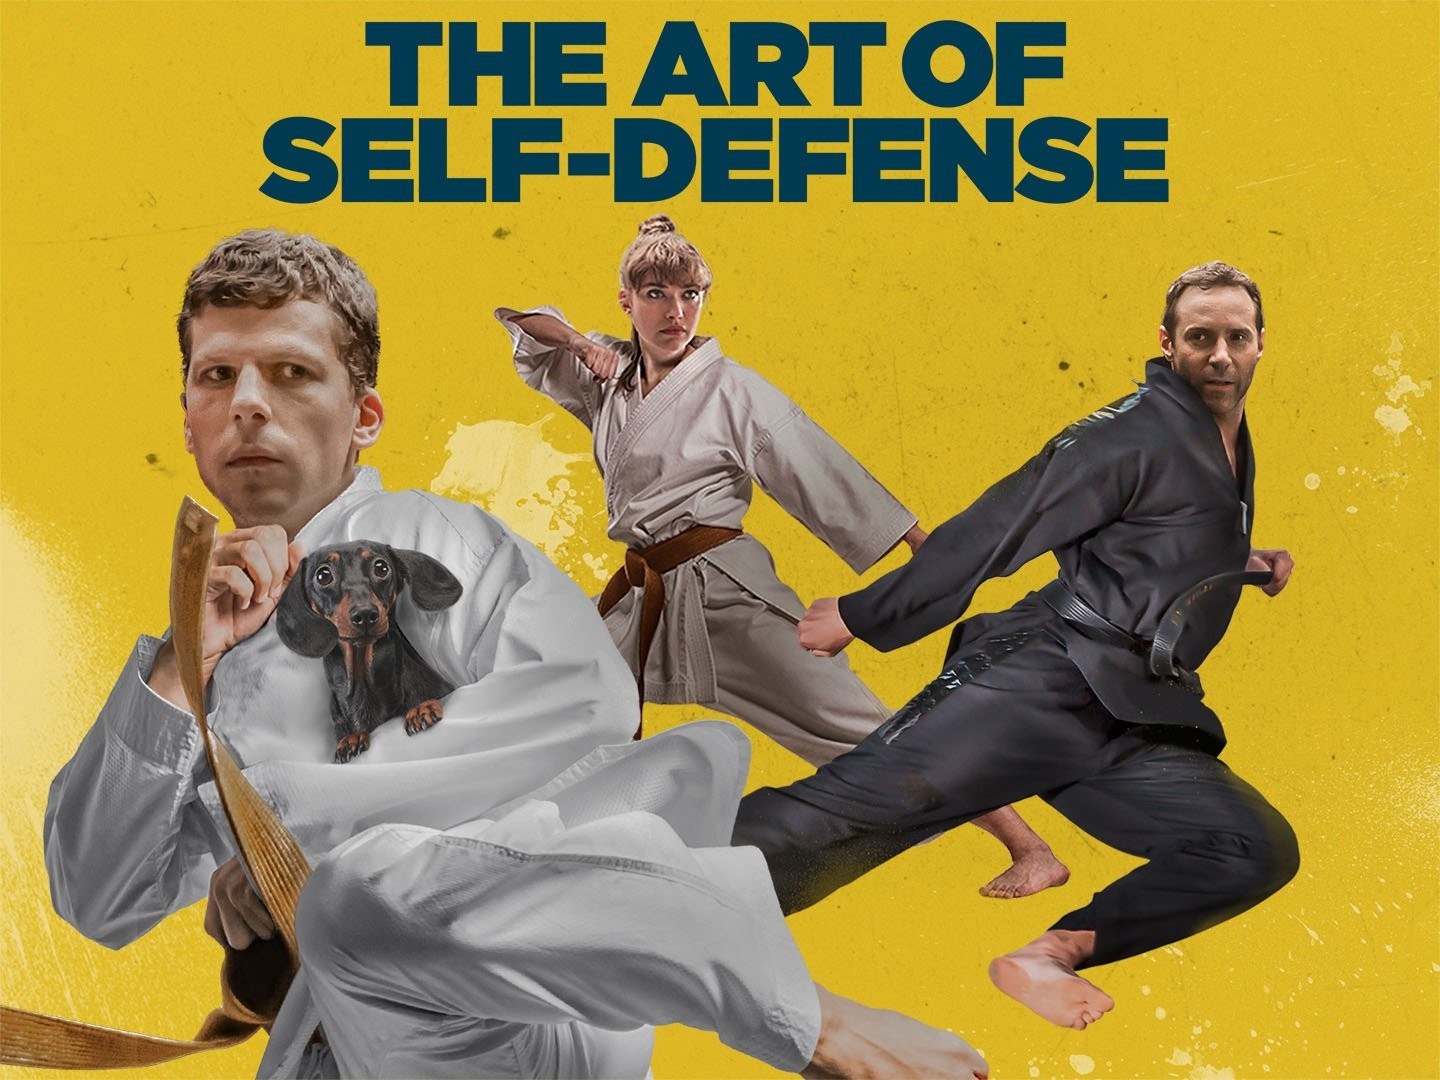 A few 'sticking' points, in the art of self-defense